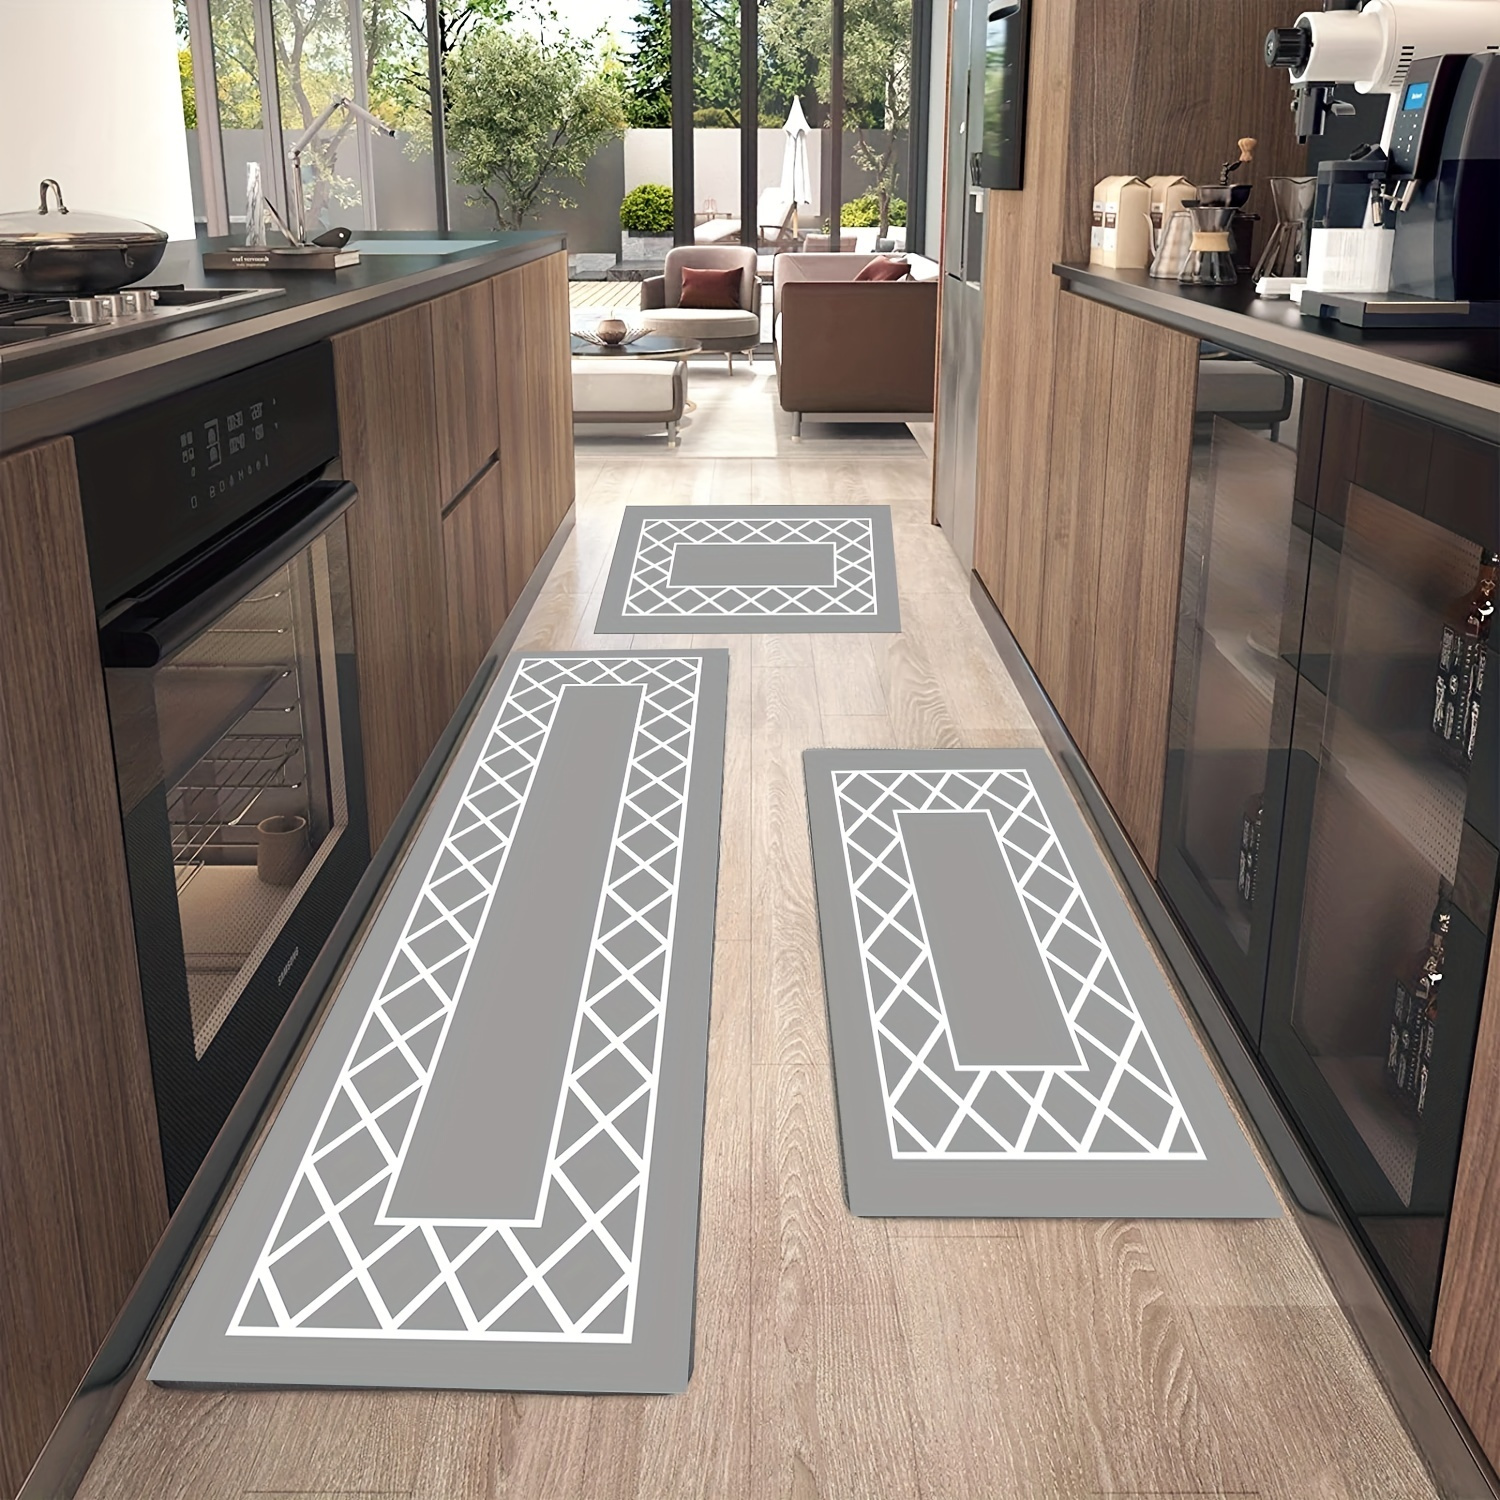 Non-Skid Kitchen Rugs: Makes Your kitchen More Attractive